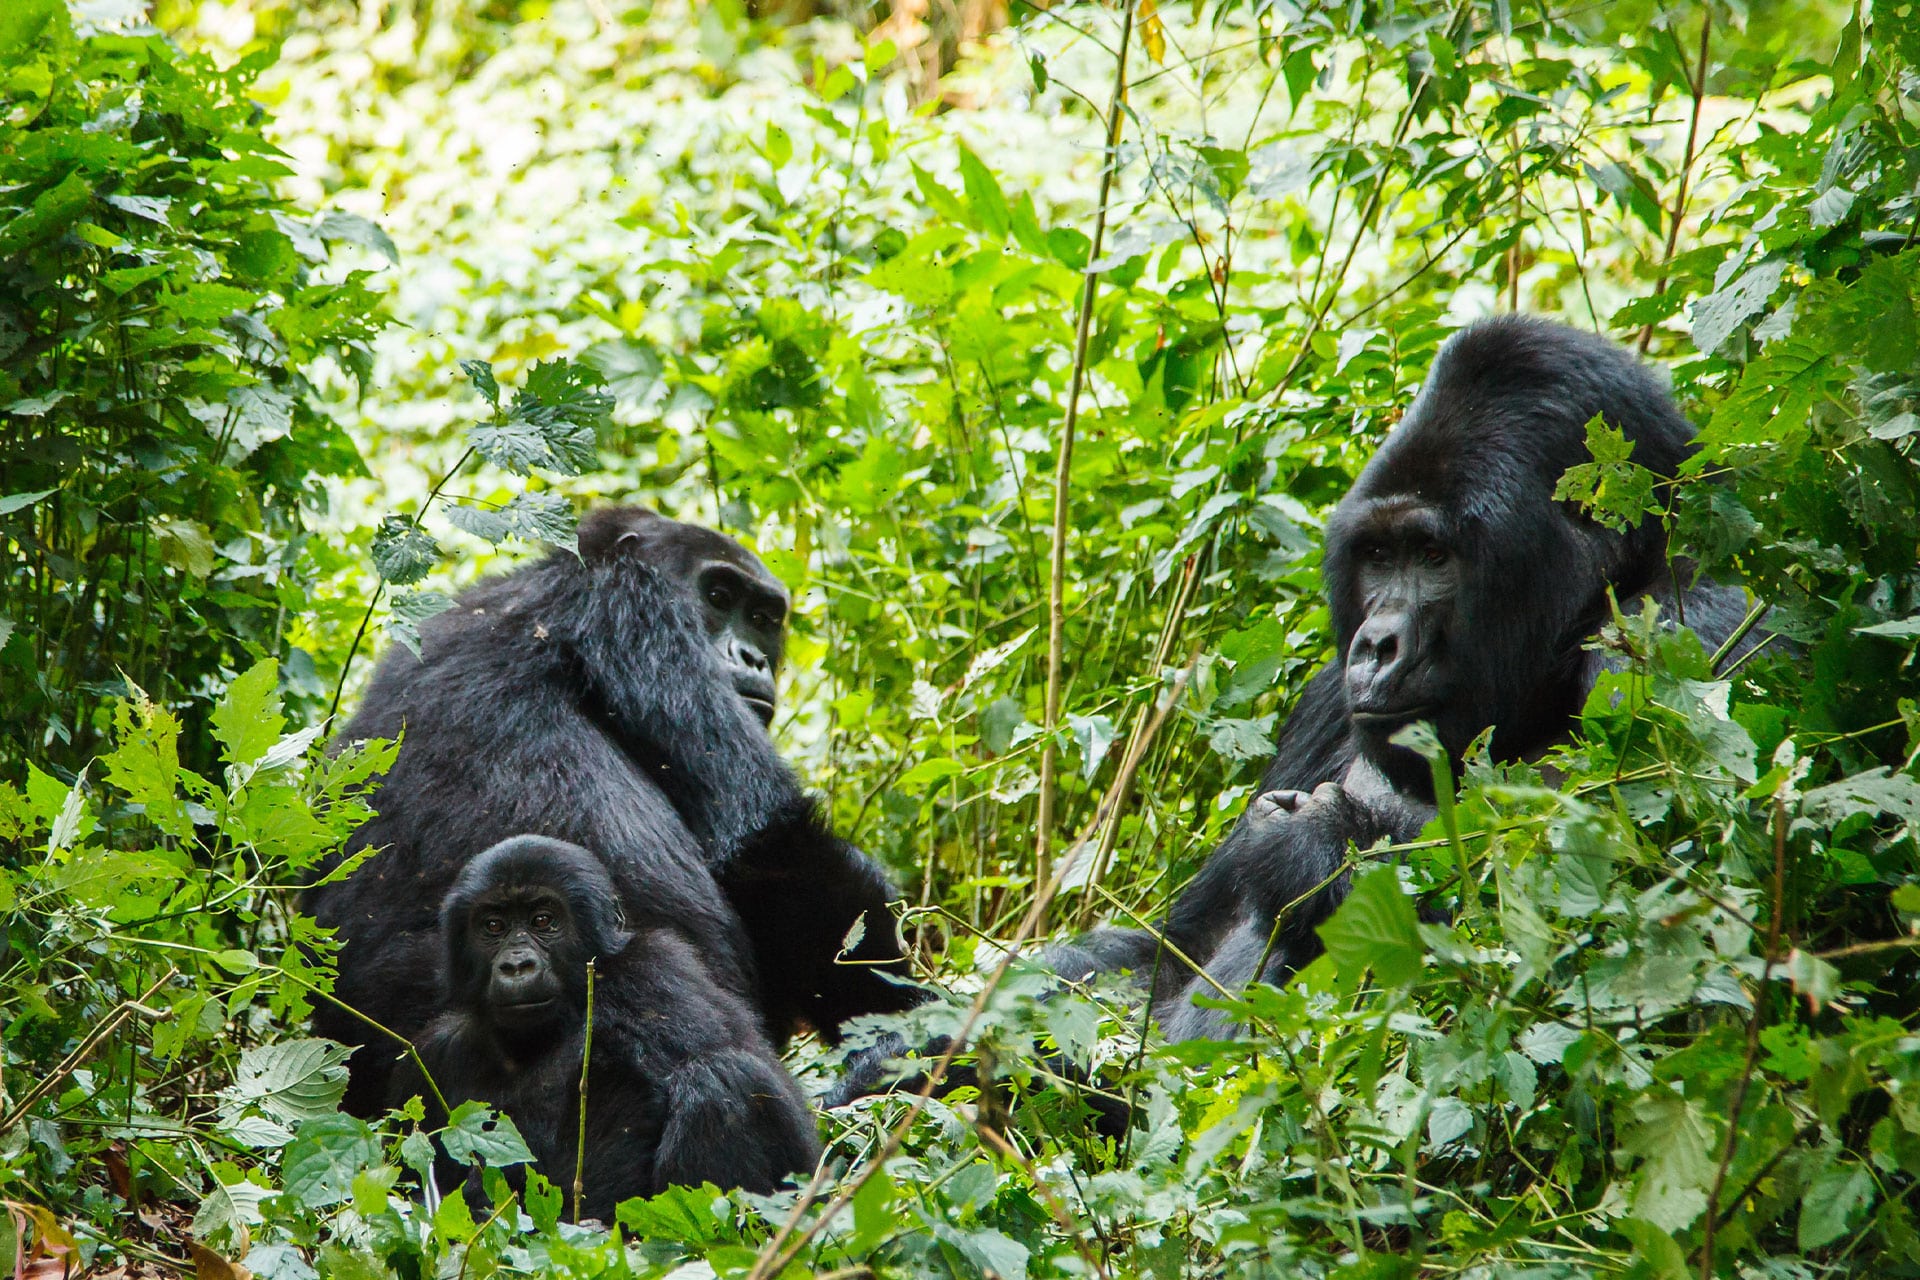 A family of mountain gorillas in Volcanoes National Park